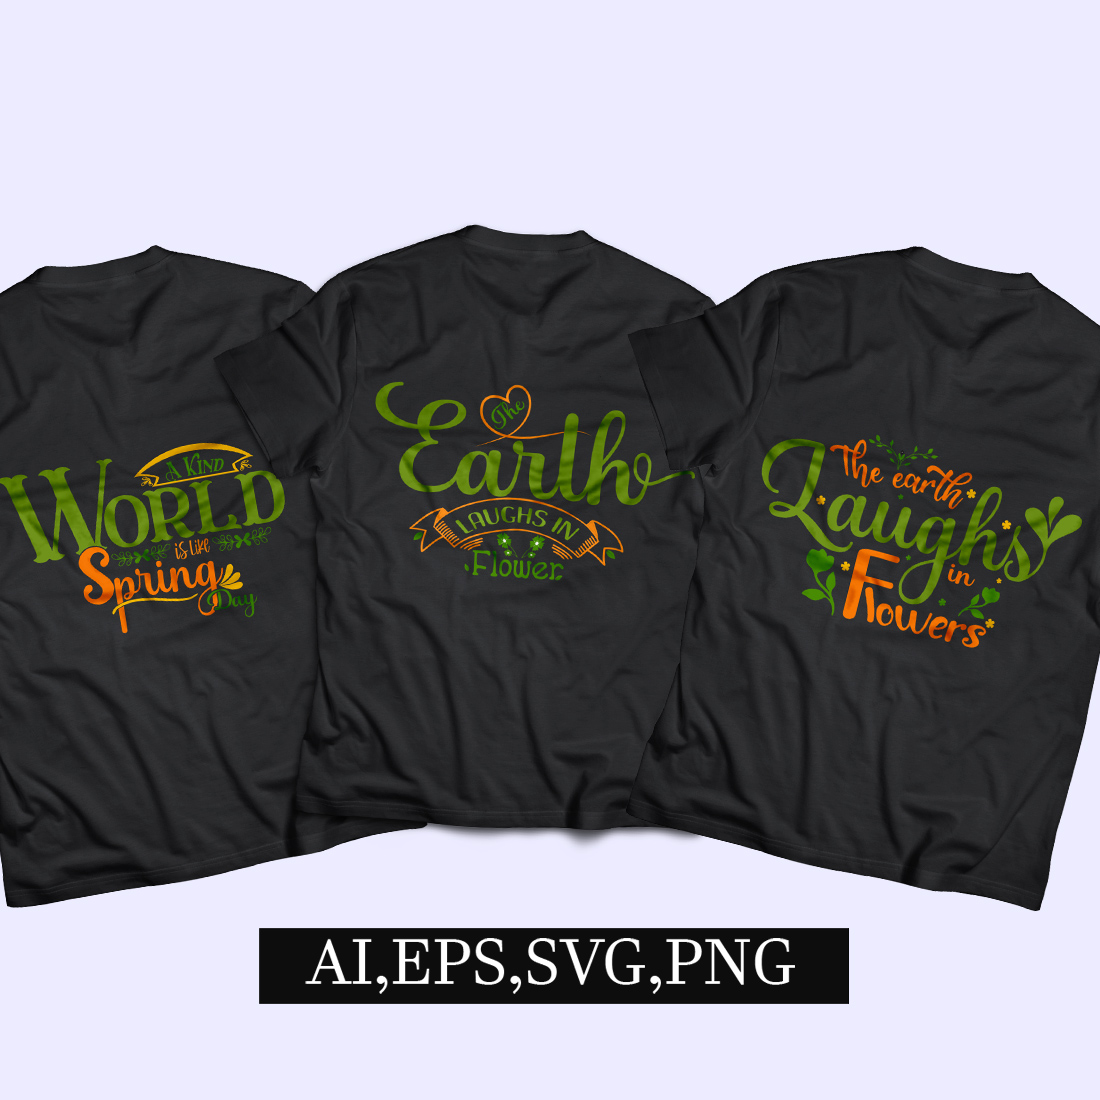 10 Spring day SVG quote typography T shirt design bundle preview image.